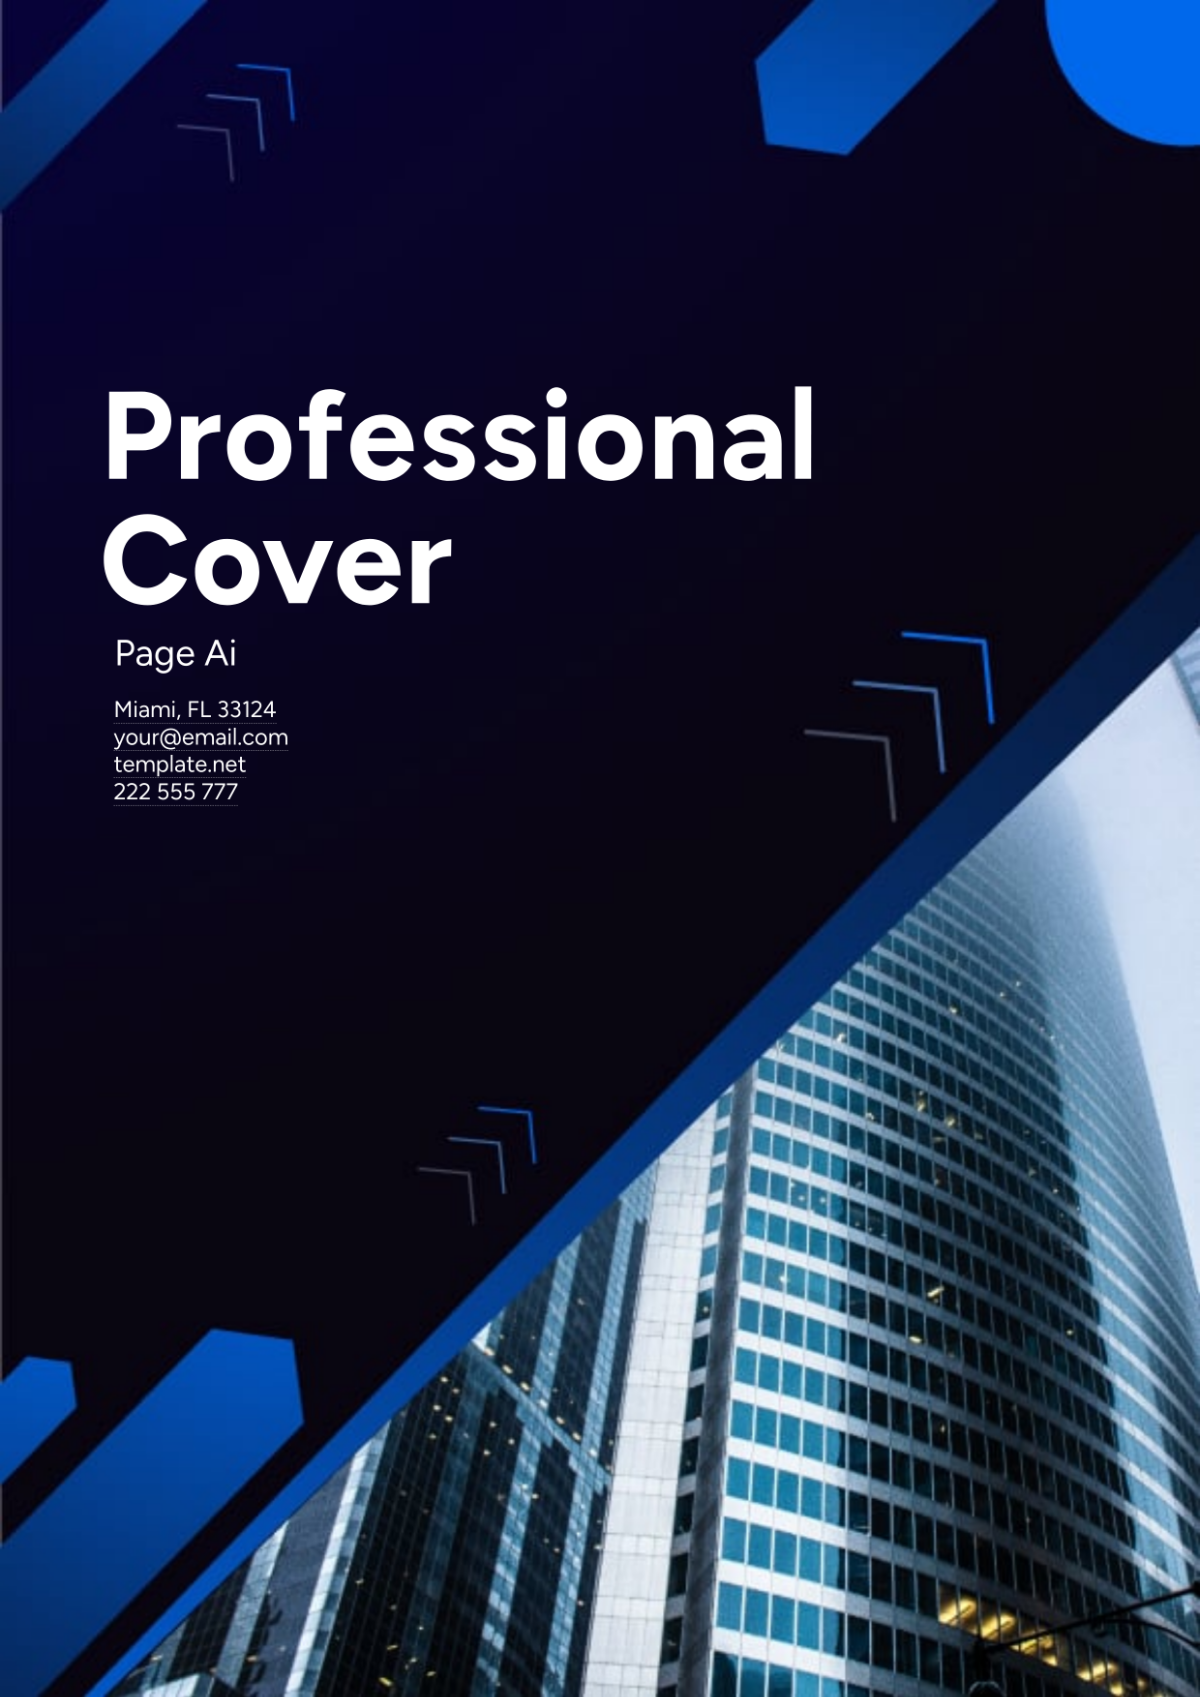 Professional Cover Page AI Template